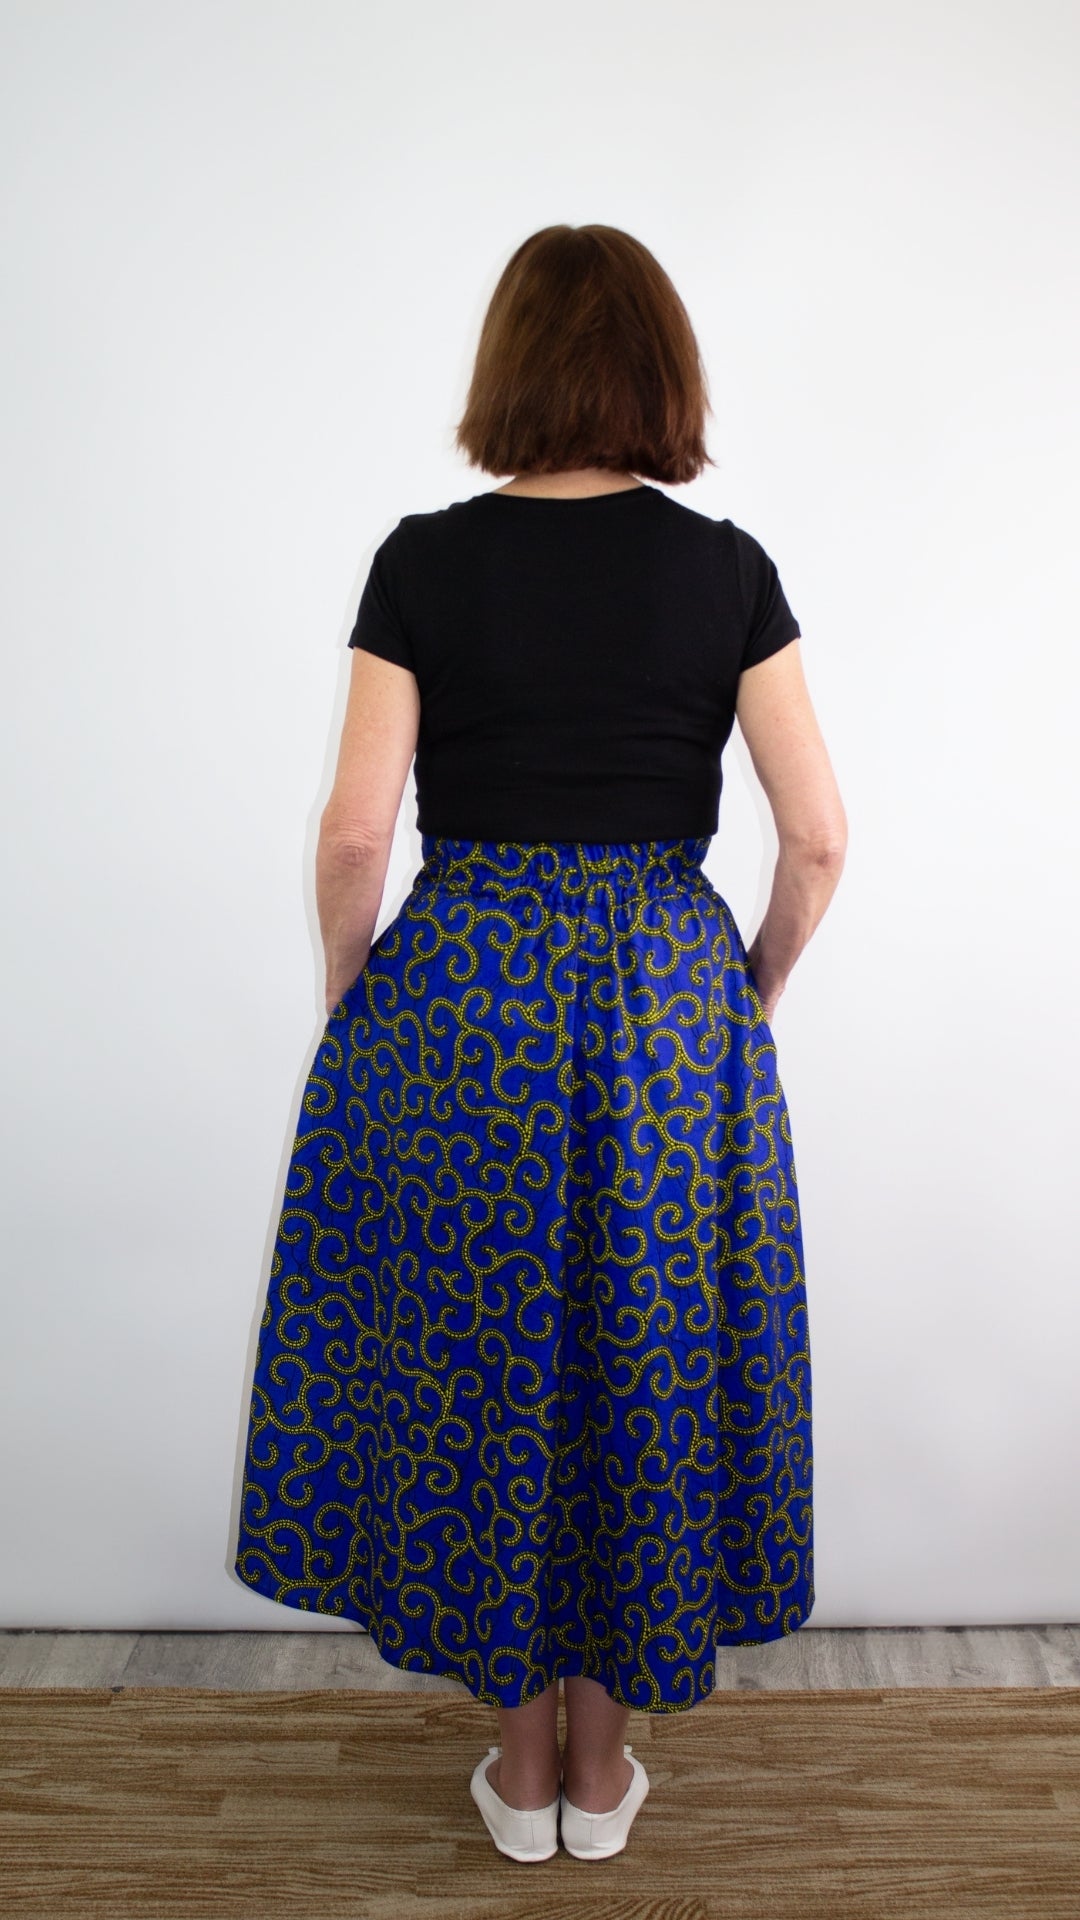 Back of the swirly blue print skirt with golden elements, accentuating a beautiful, flowing silhouette.